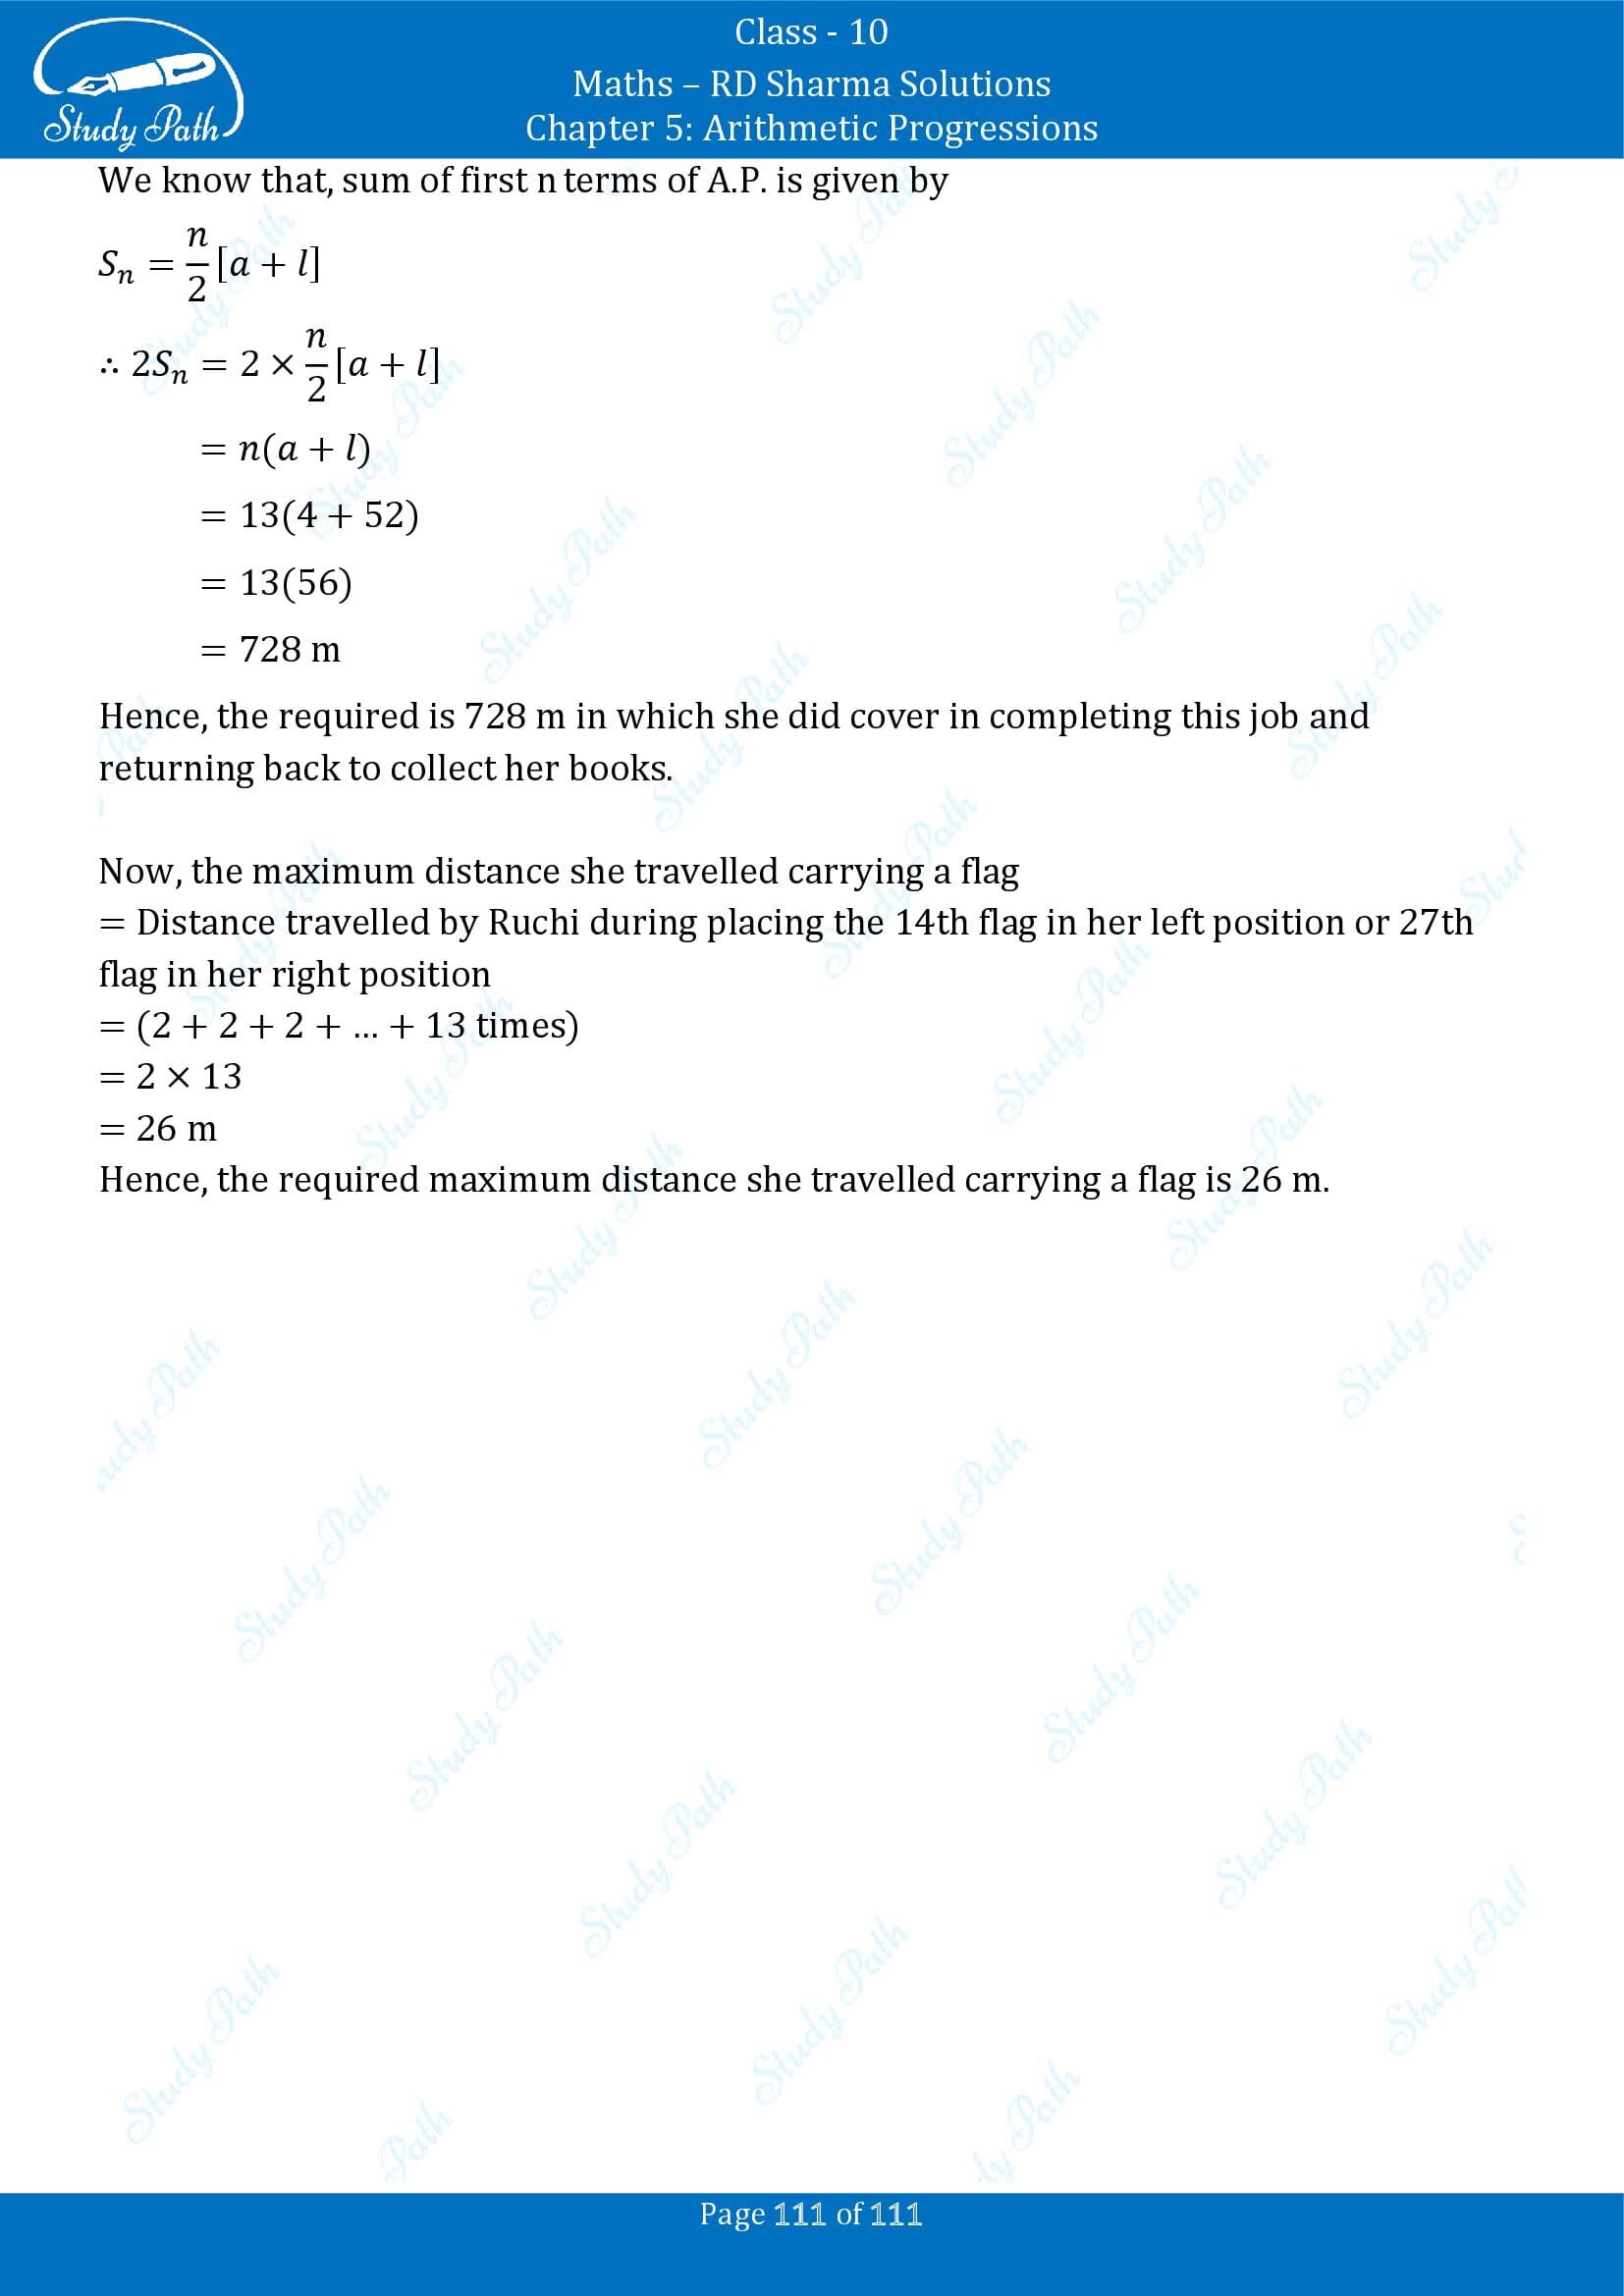 RD Sharma Solutions Class 10 Chapter 5 Arithmetic Progressions Exercise 5.6 00111